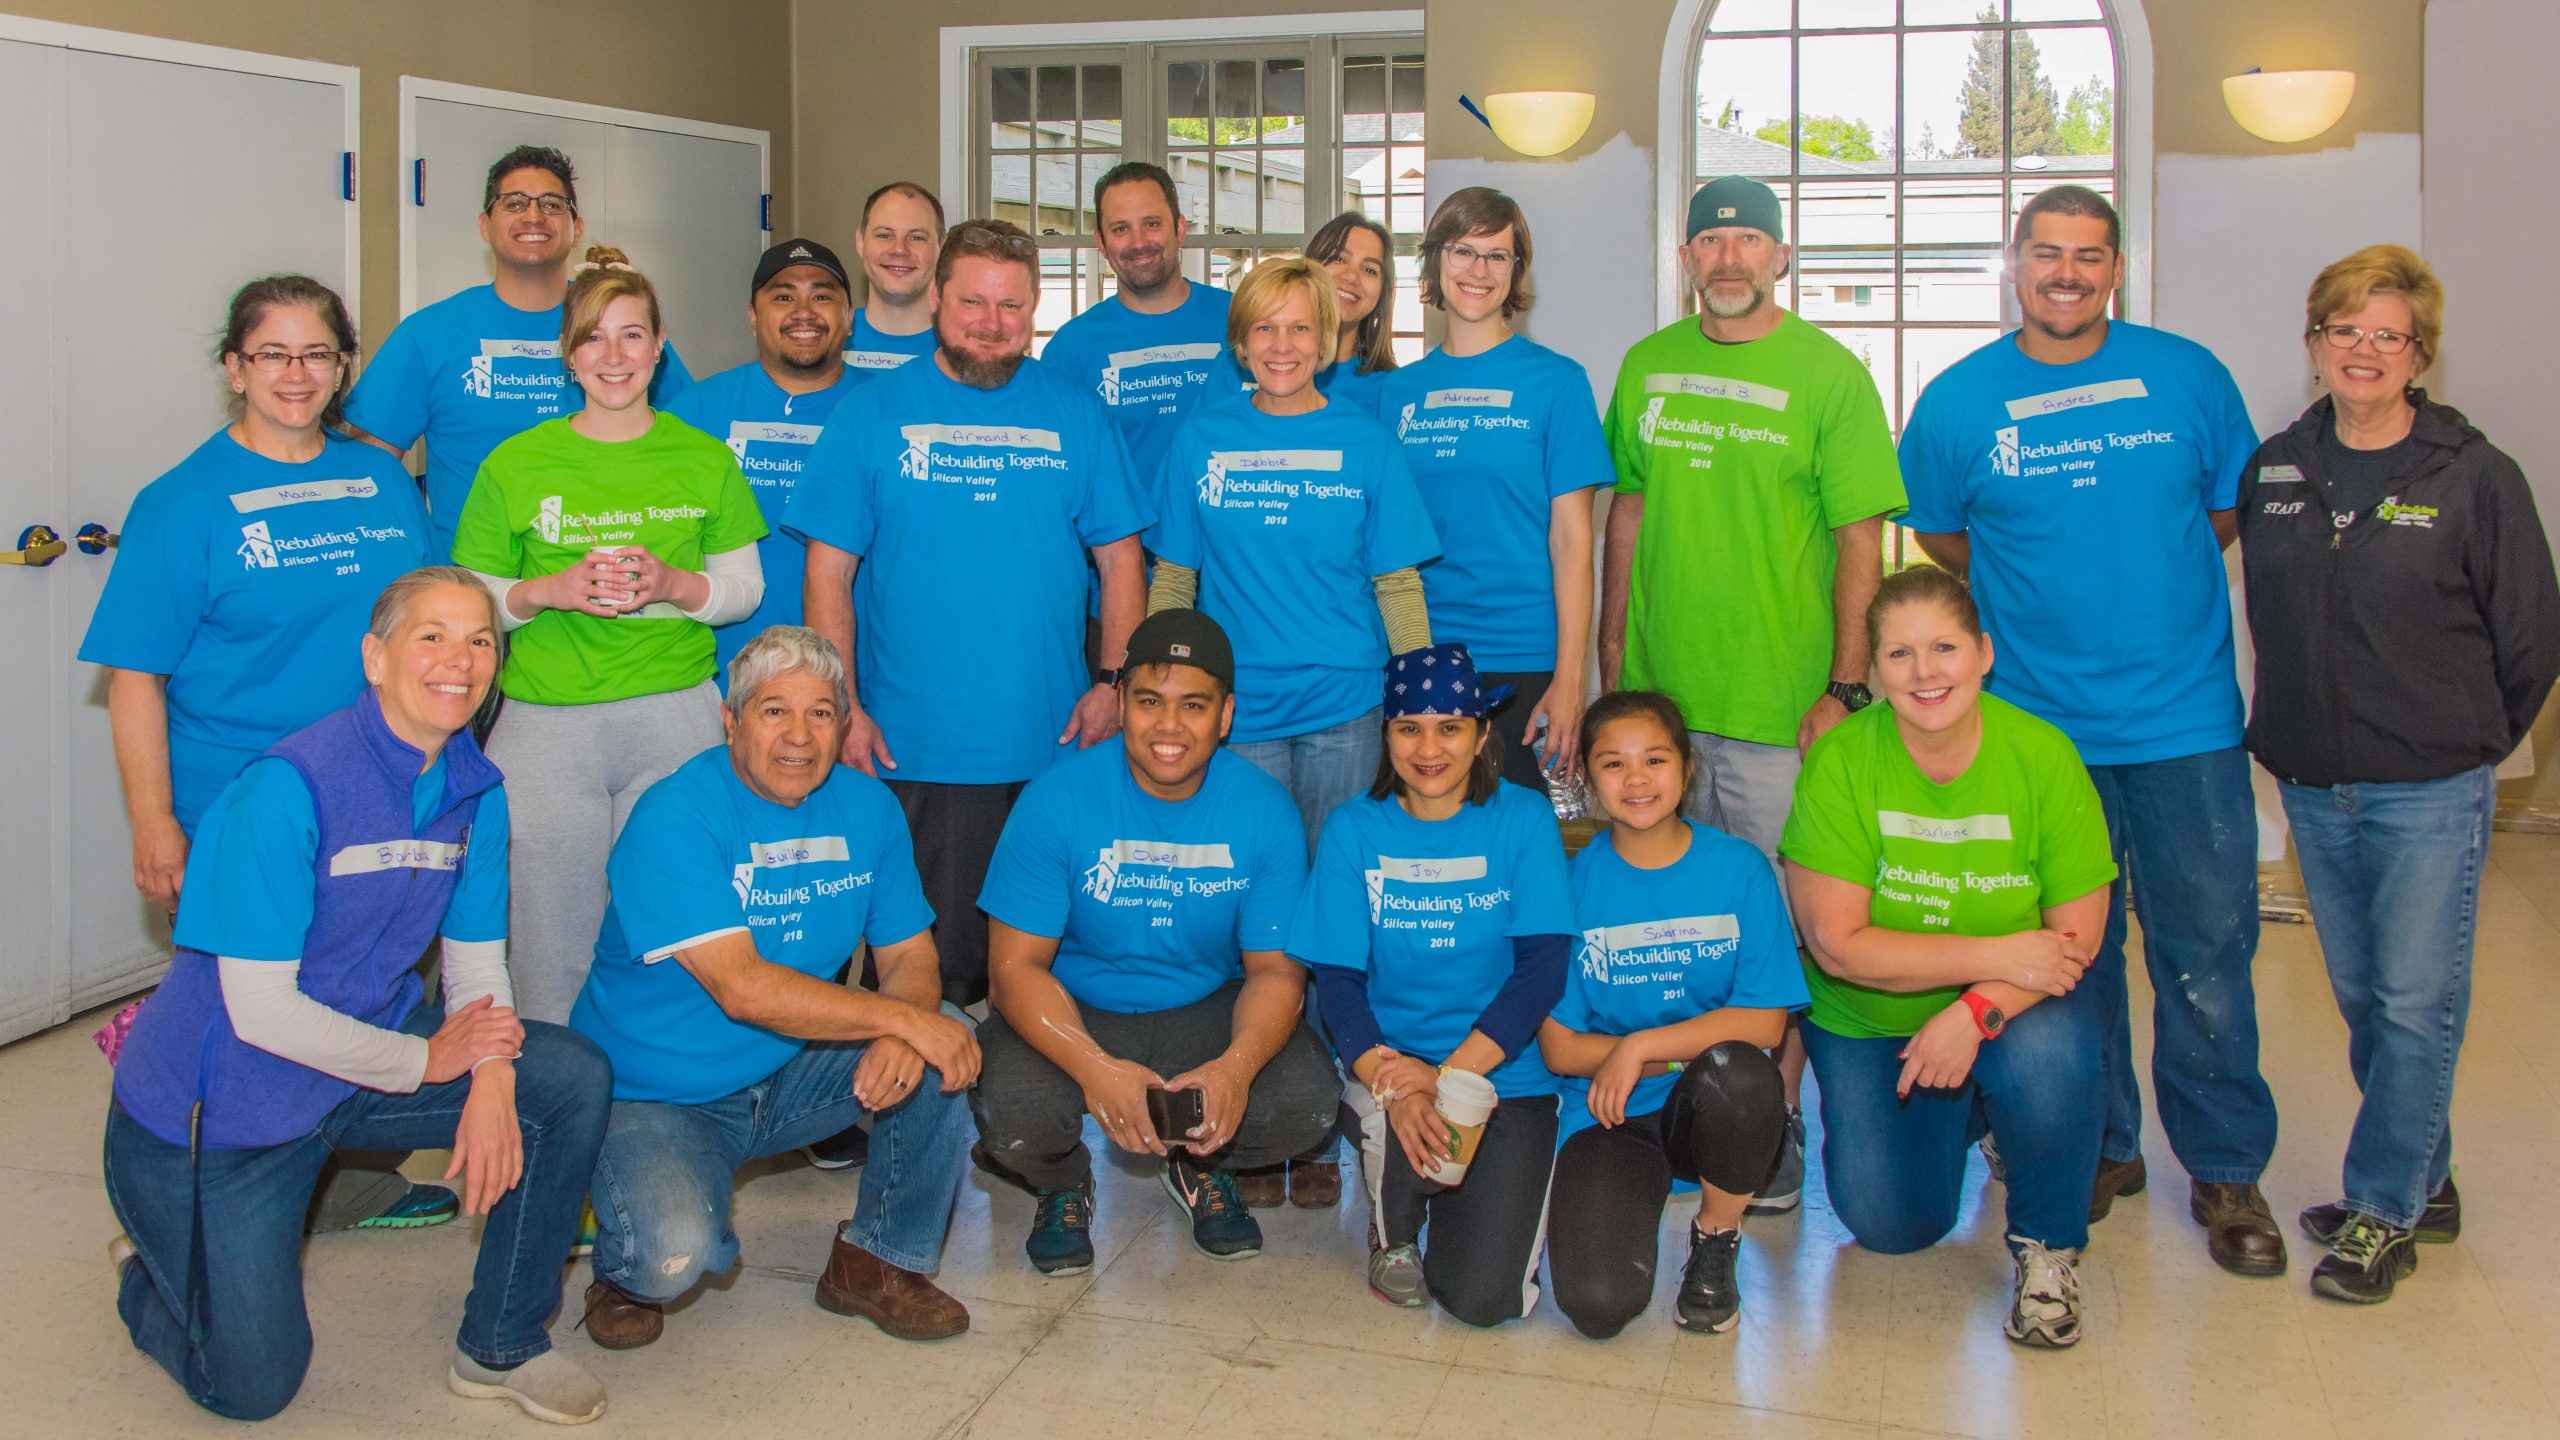 BCCI Construction Company Gives Back To The South Bay Community